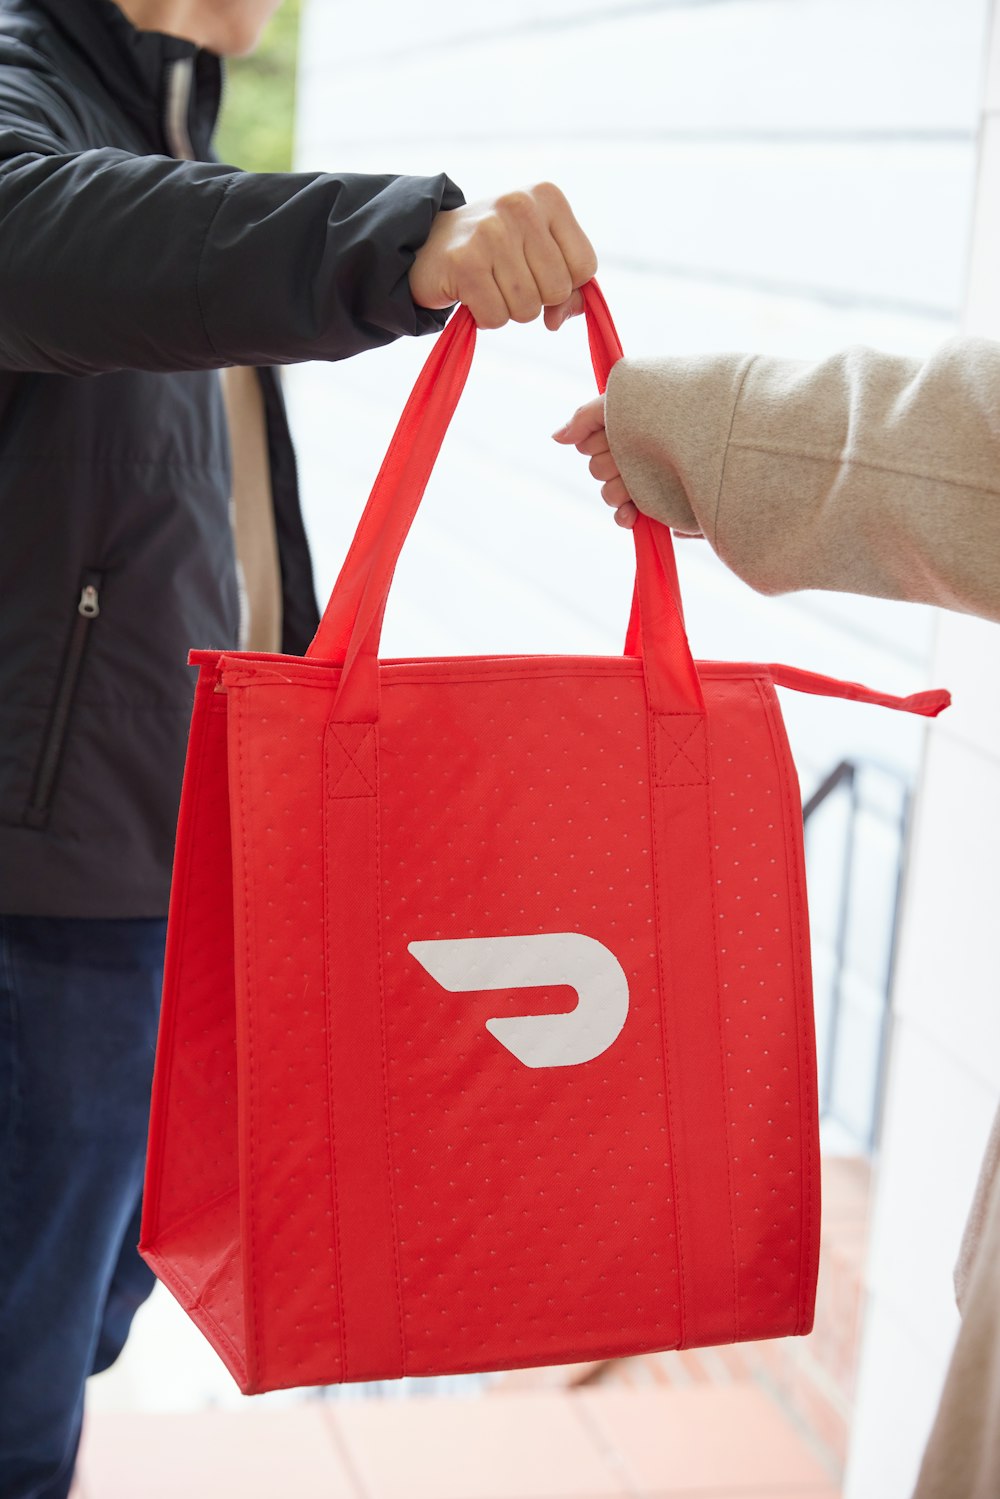 a person holding a red bag with the letter D on it